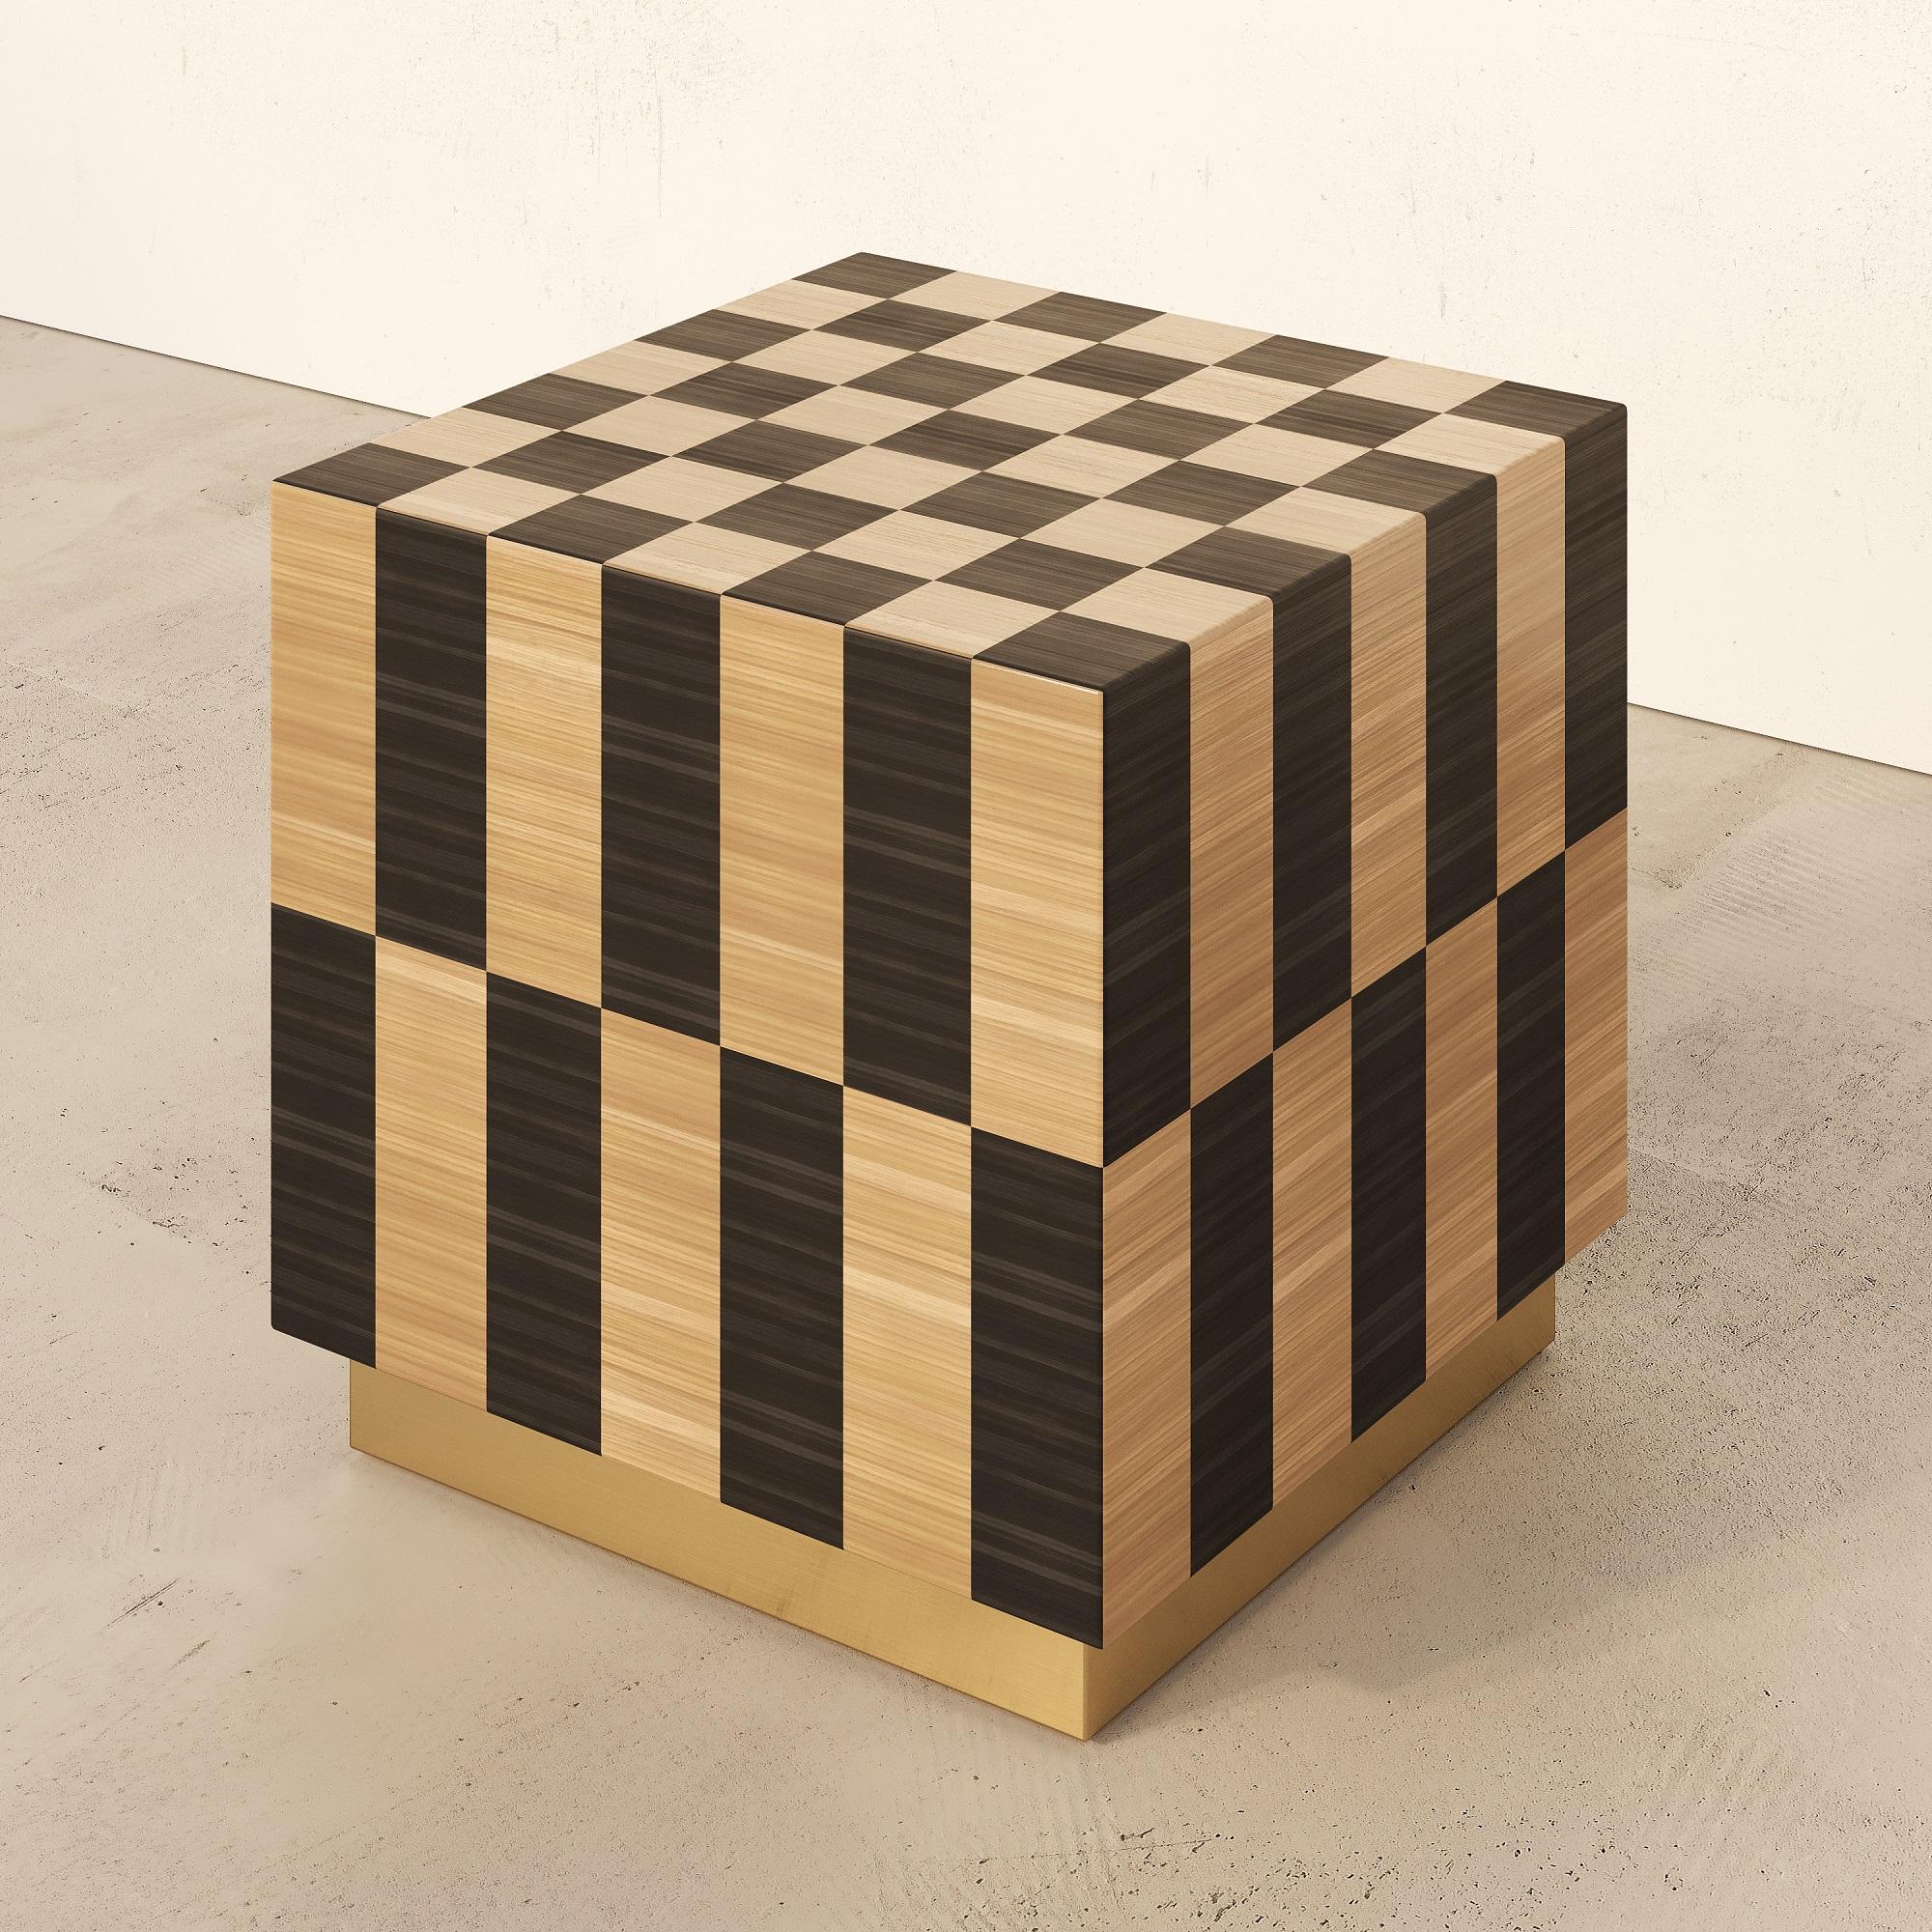 BLOCK SIDE TABLE in straw marquetry technique

Inlay scheme: Checkerboard
Colour scheme: Black Beige
MATERIALS: MDF, painted rye straw, wax
DIMENSIONS (cm): 40x40x45 cm.
Dimensions and colours are customizable
Packaging dimensions (cm): 50 x 50 x H